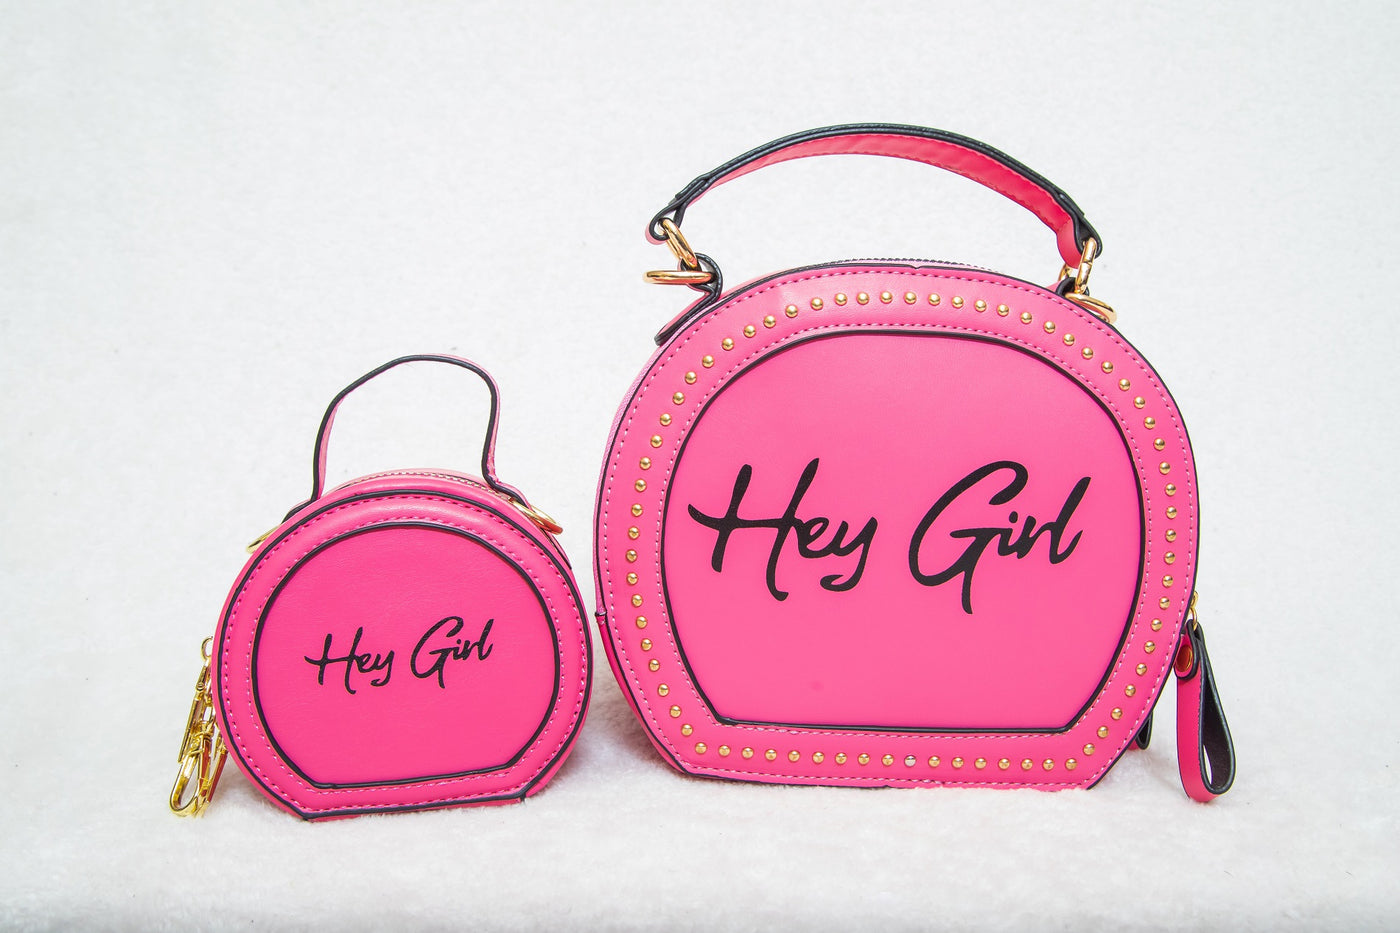 “Pretty in Pink” Mommy and Me Handbag Set